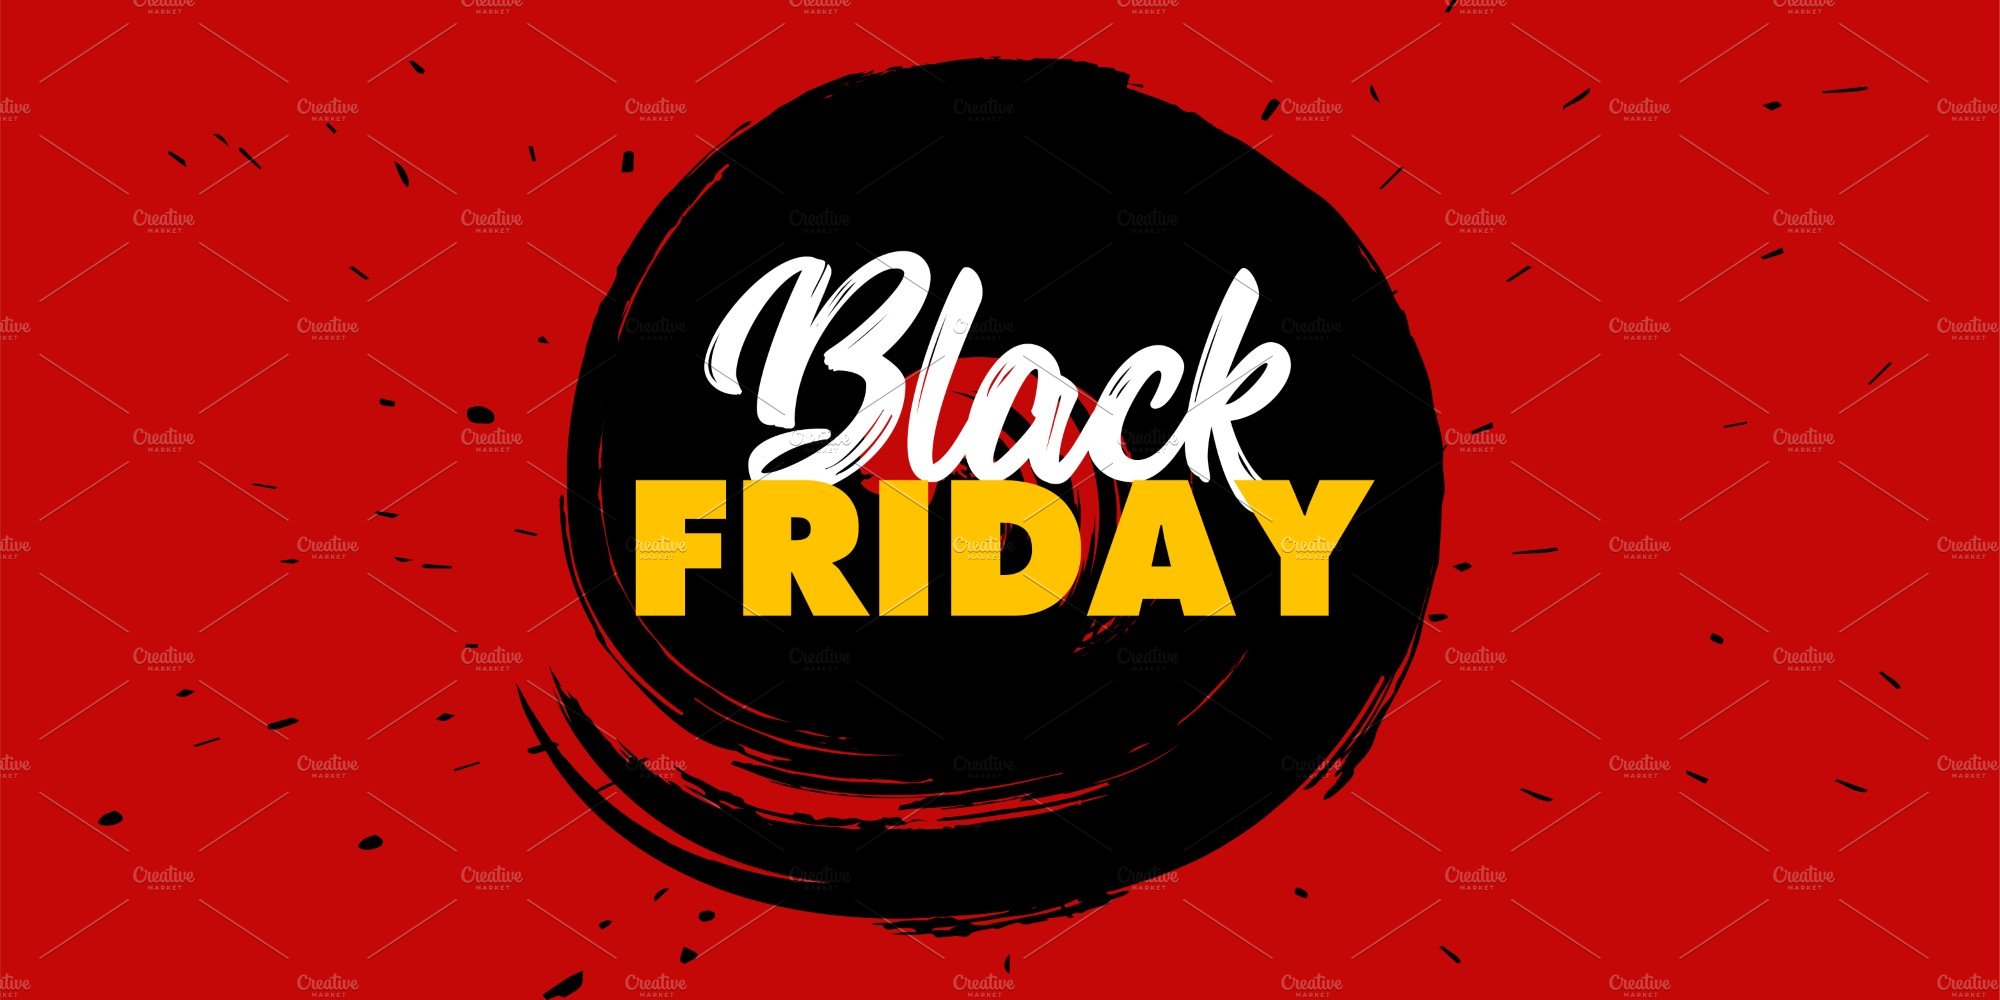 Deep red banner with brush round and two colored lettering for Black Friday's sale.